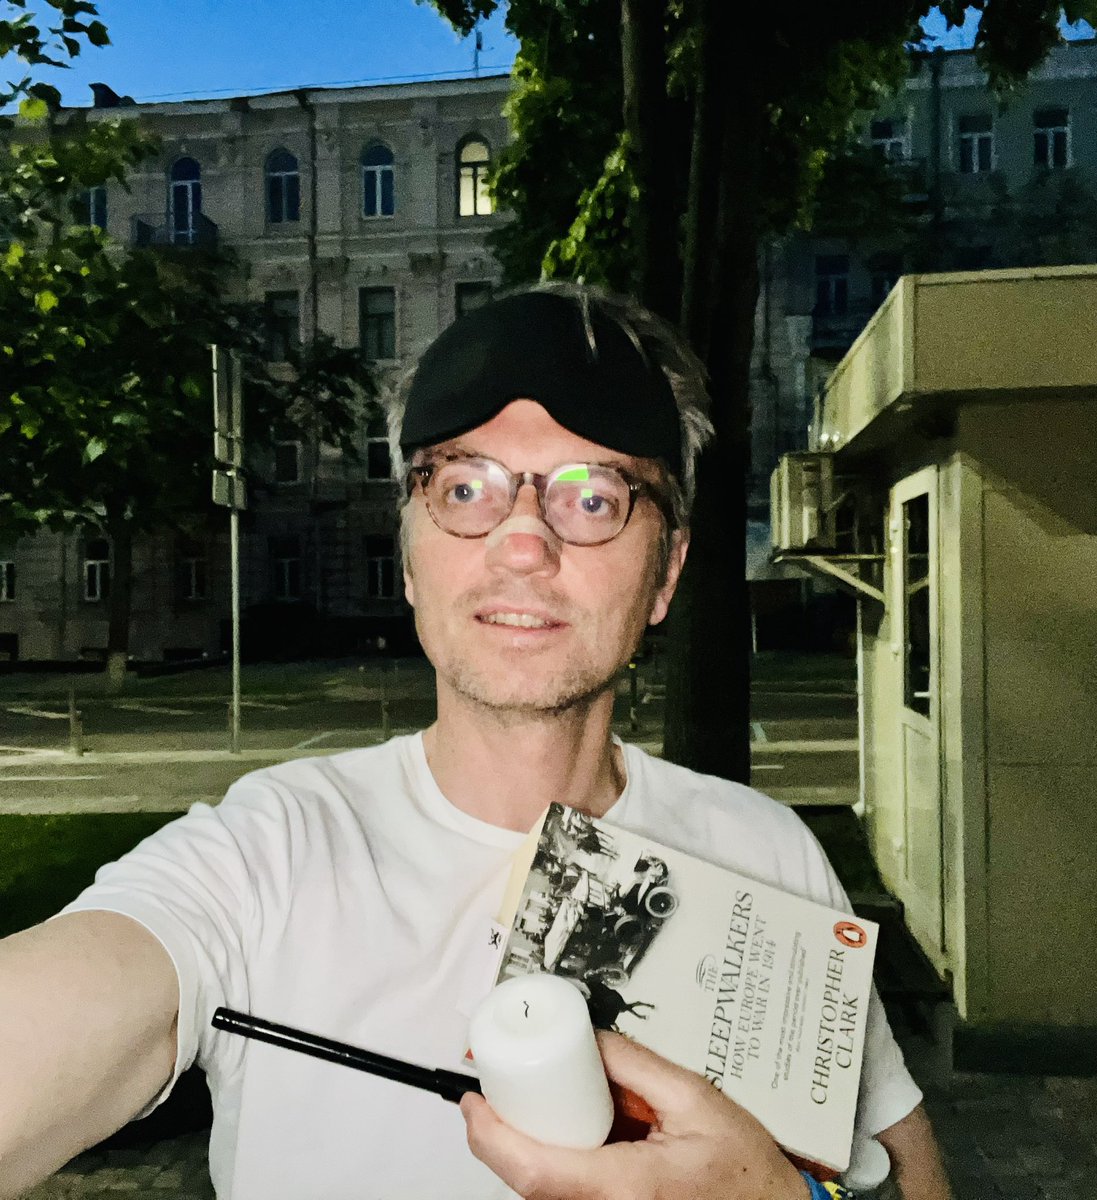 Air alert just over, me coming out of the shelter. #SleeplessMay sucks, but watching how #Ukrainians handle a month of relentless Russian terror bombing just strengthens my conviction that #Ukraine will triumph.